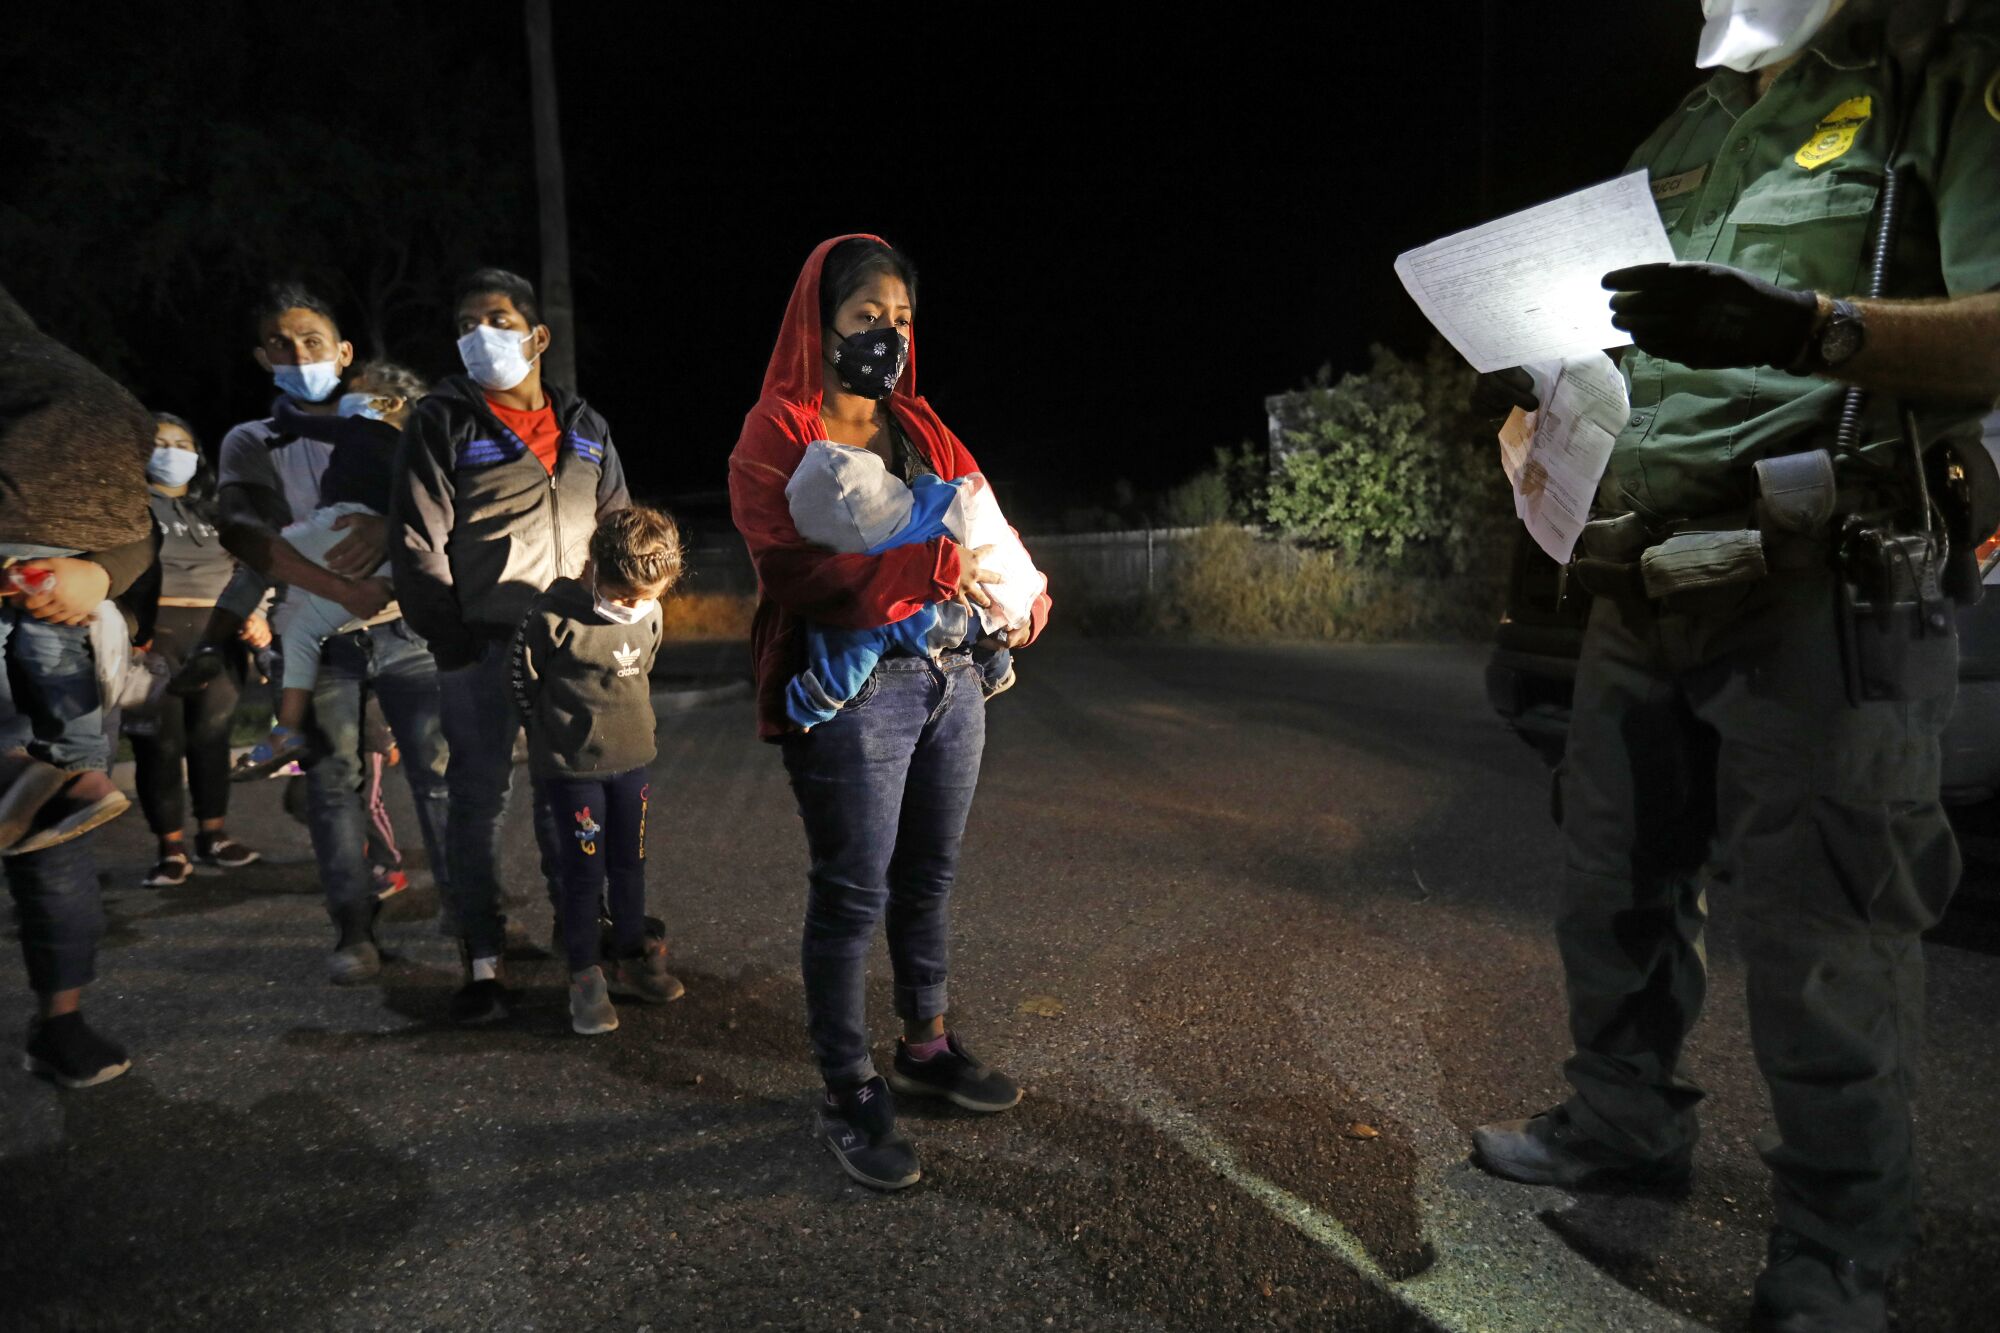 A line of migrant adults and children standing before a Border Patrol agent at night.